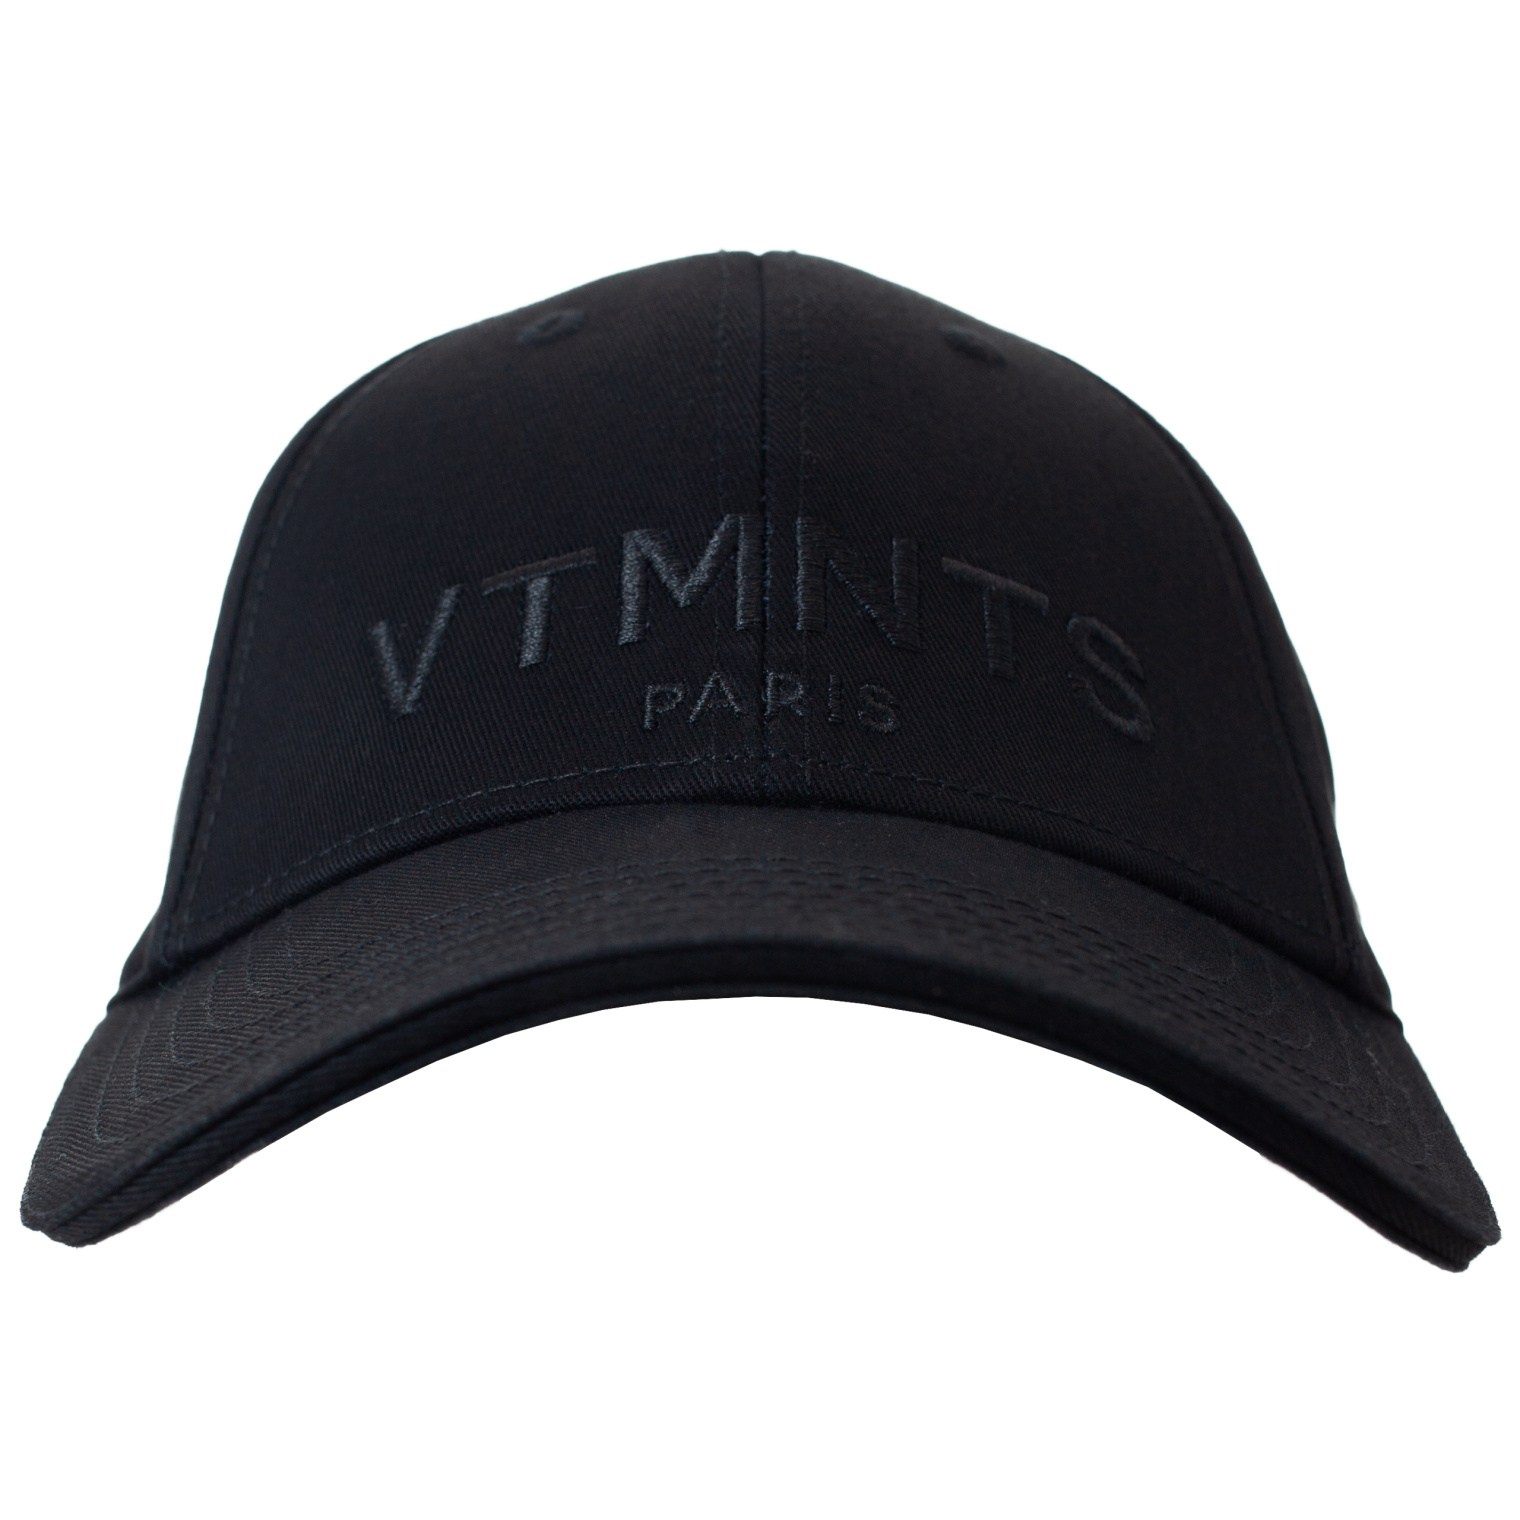 VTMNTS Embroidered logo cap